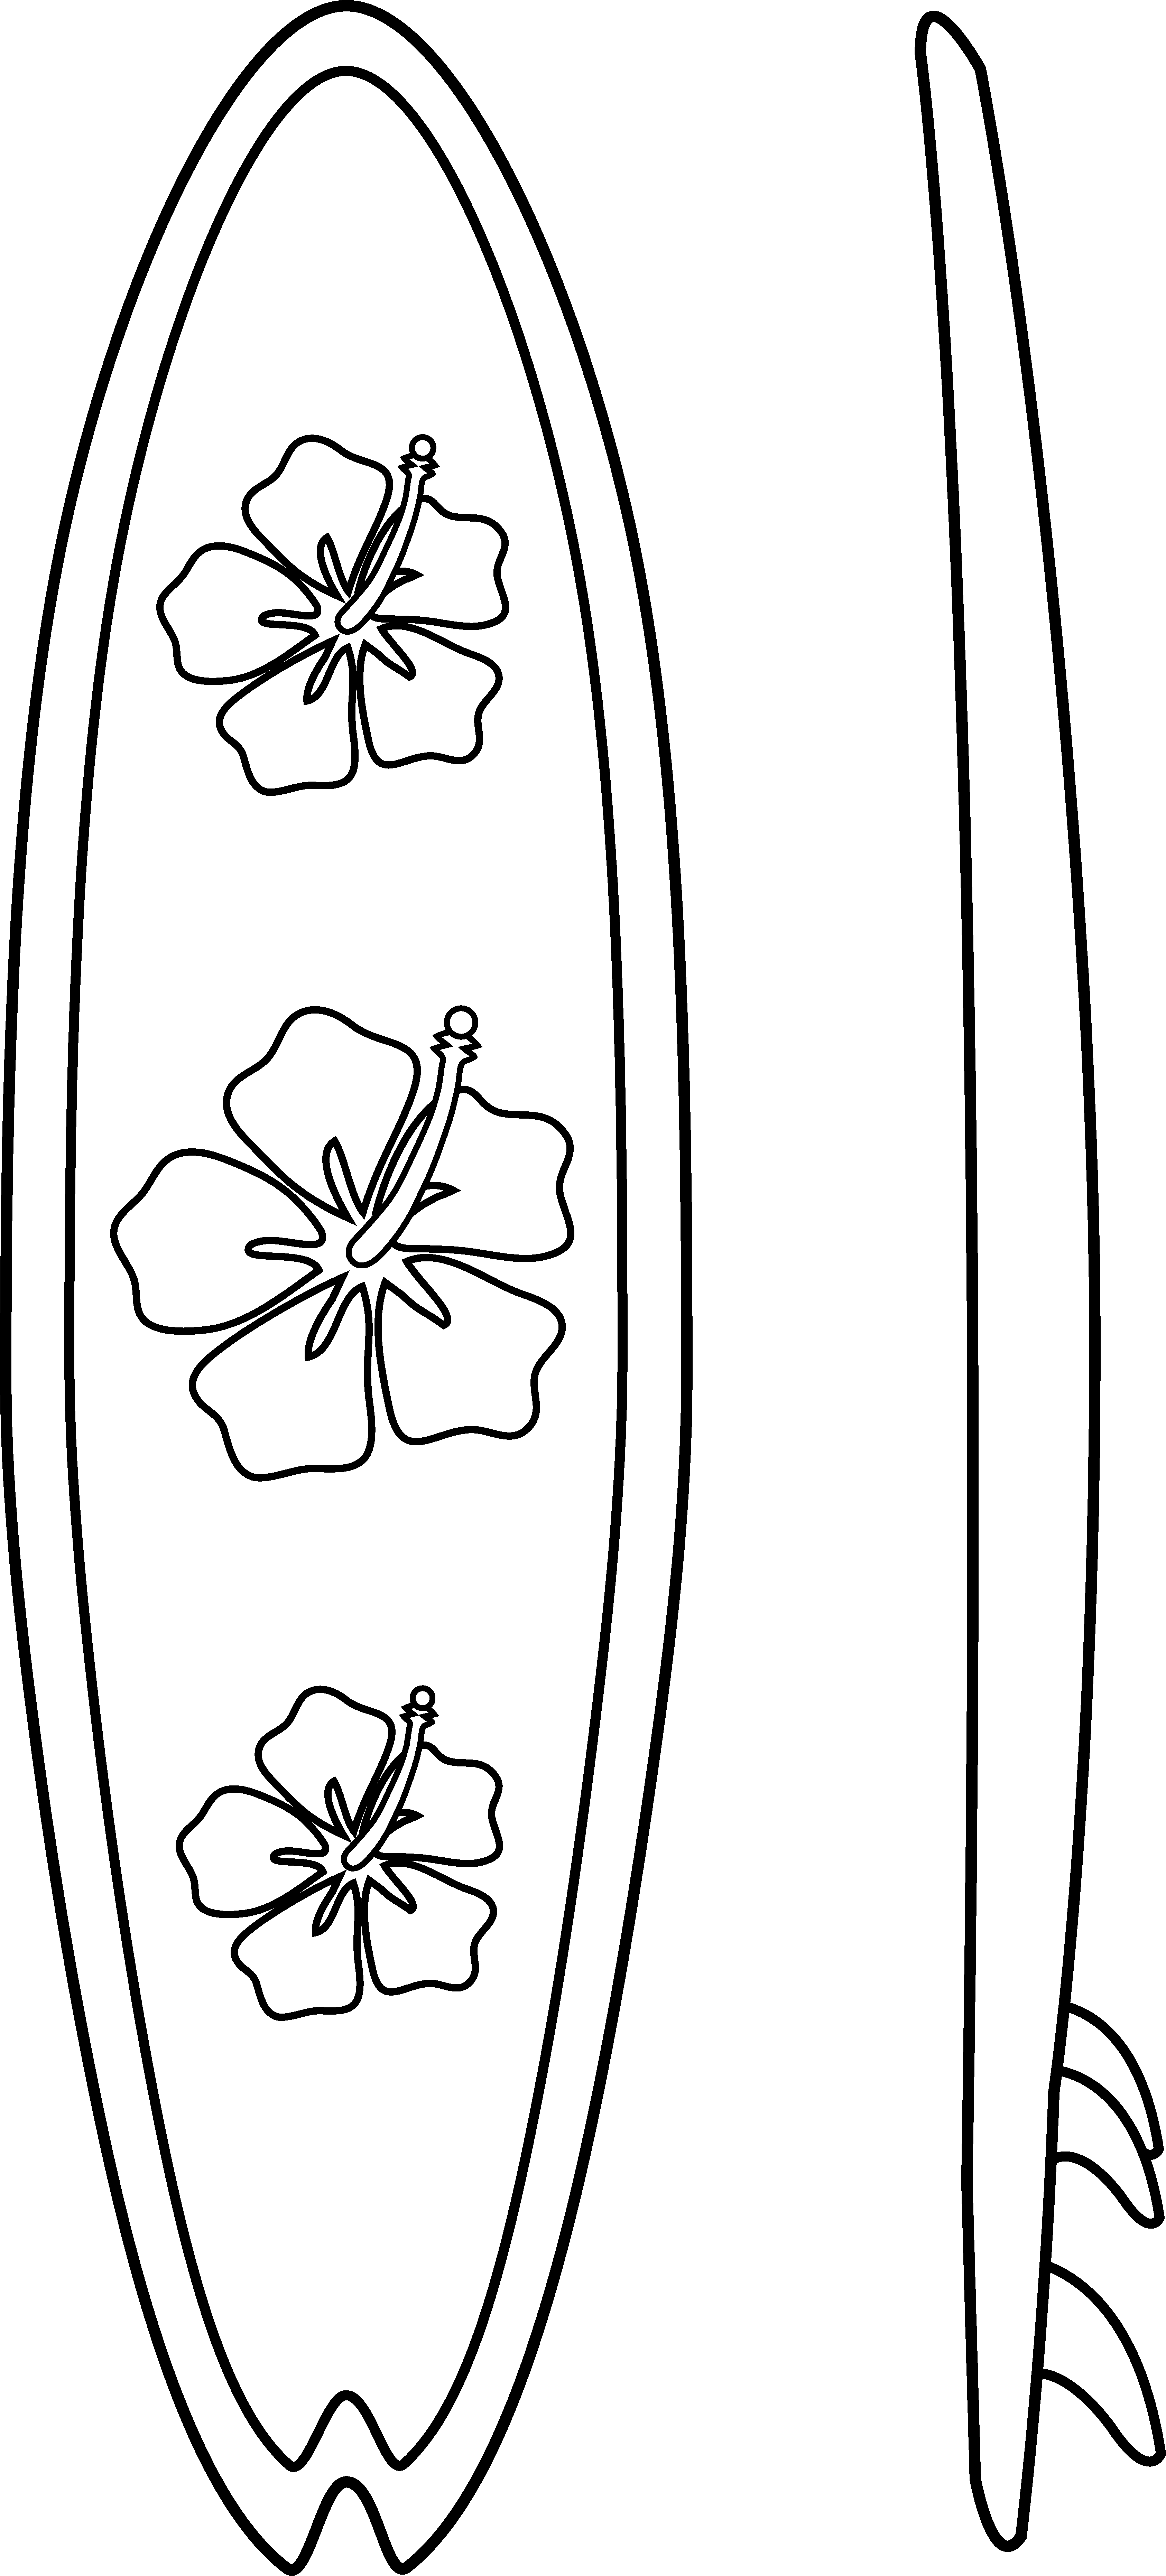 surfboard to color surfboard coloring pages to download and print for free color surfboard to 